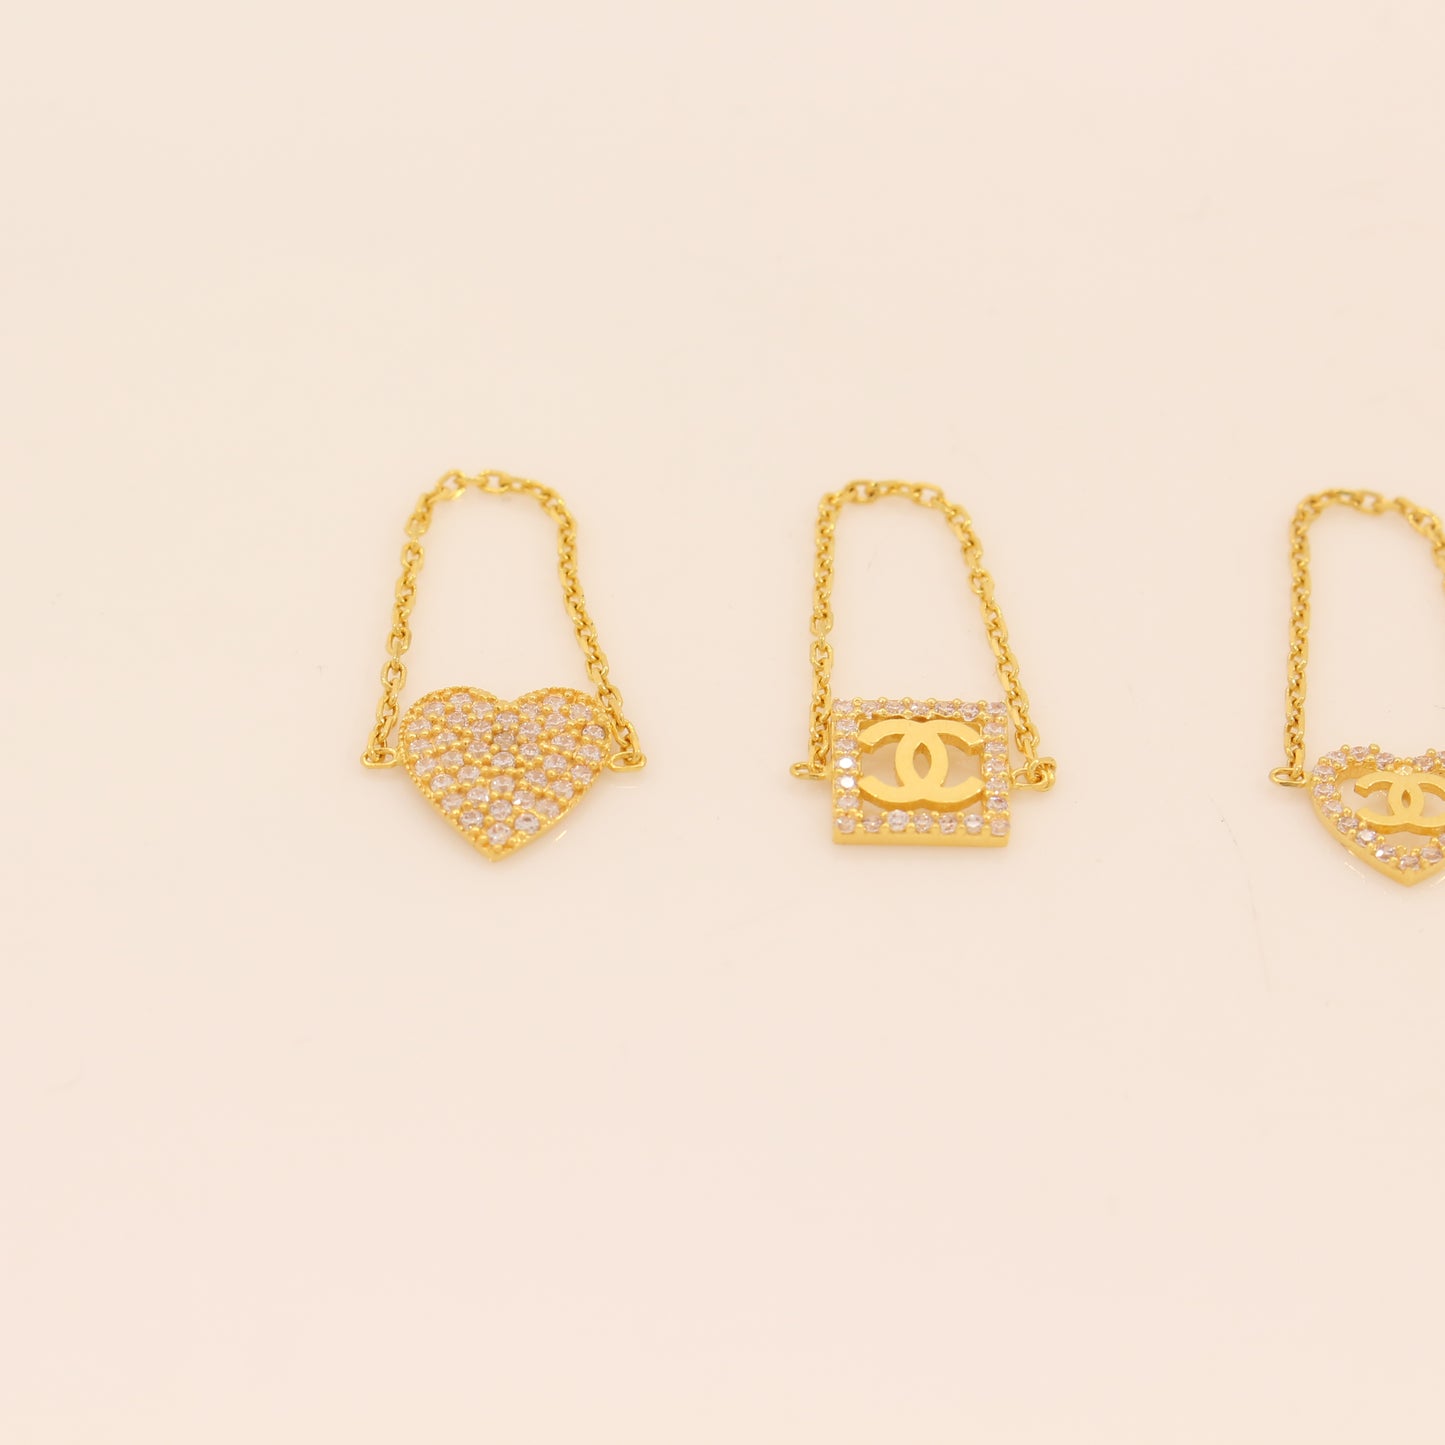 21K Gold Chain Rings Size 6.5